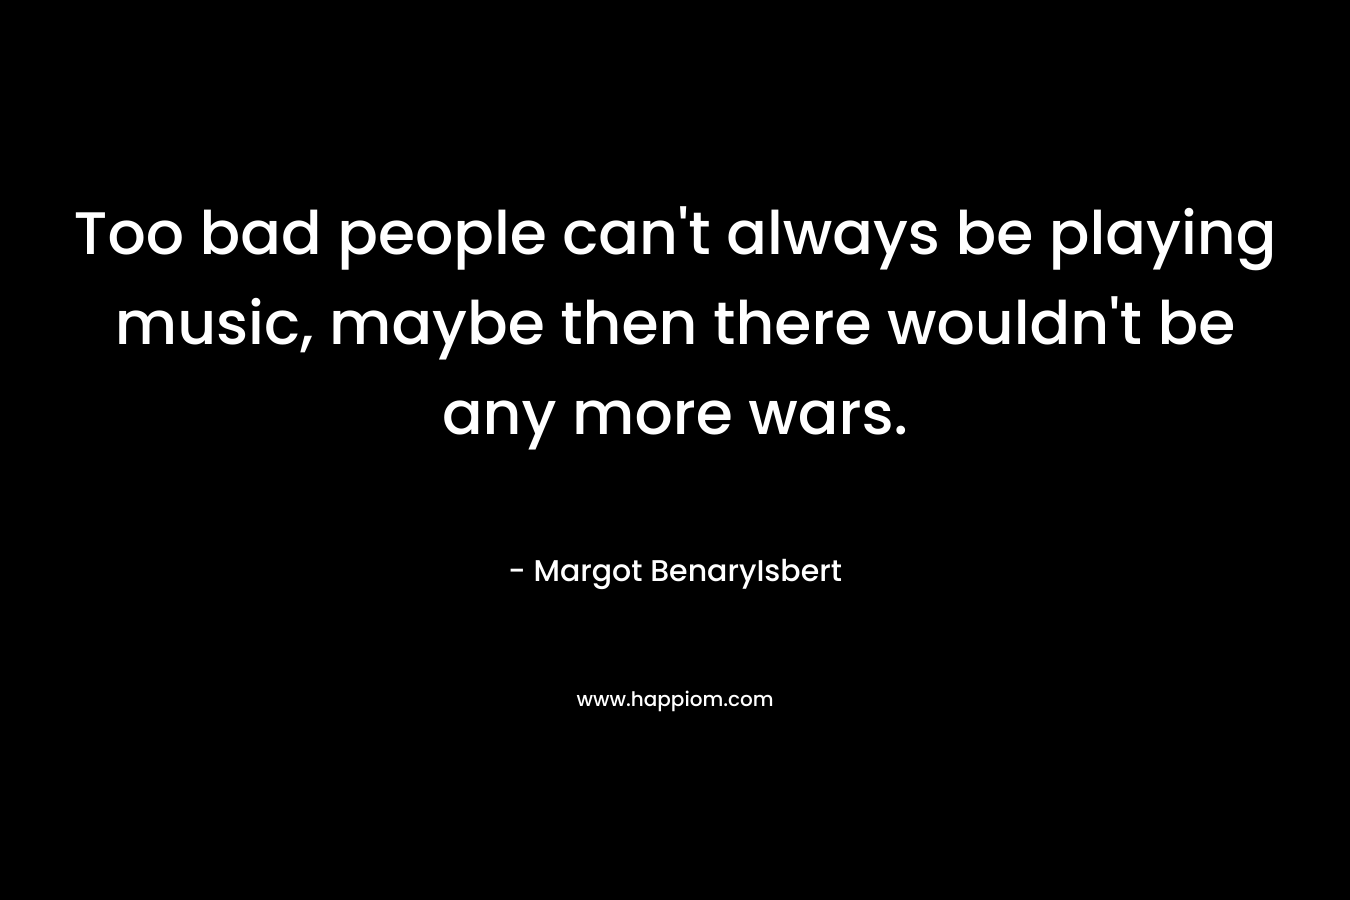 Too bad people can't always be playing music, maybe then there wouldn't be any more wars.